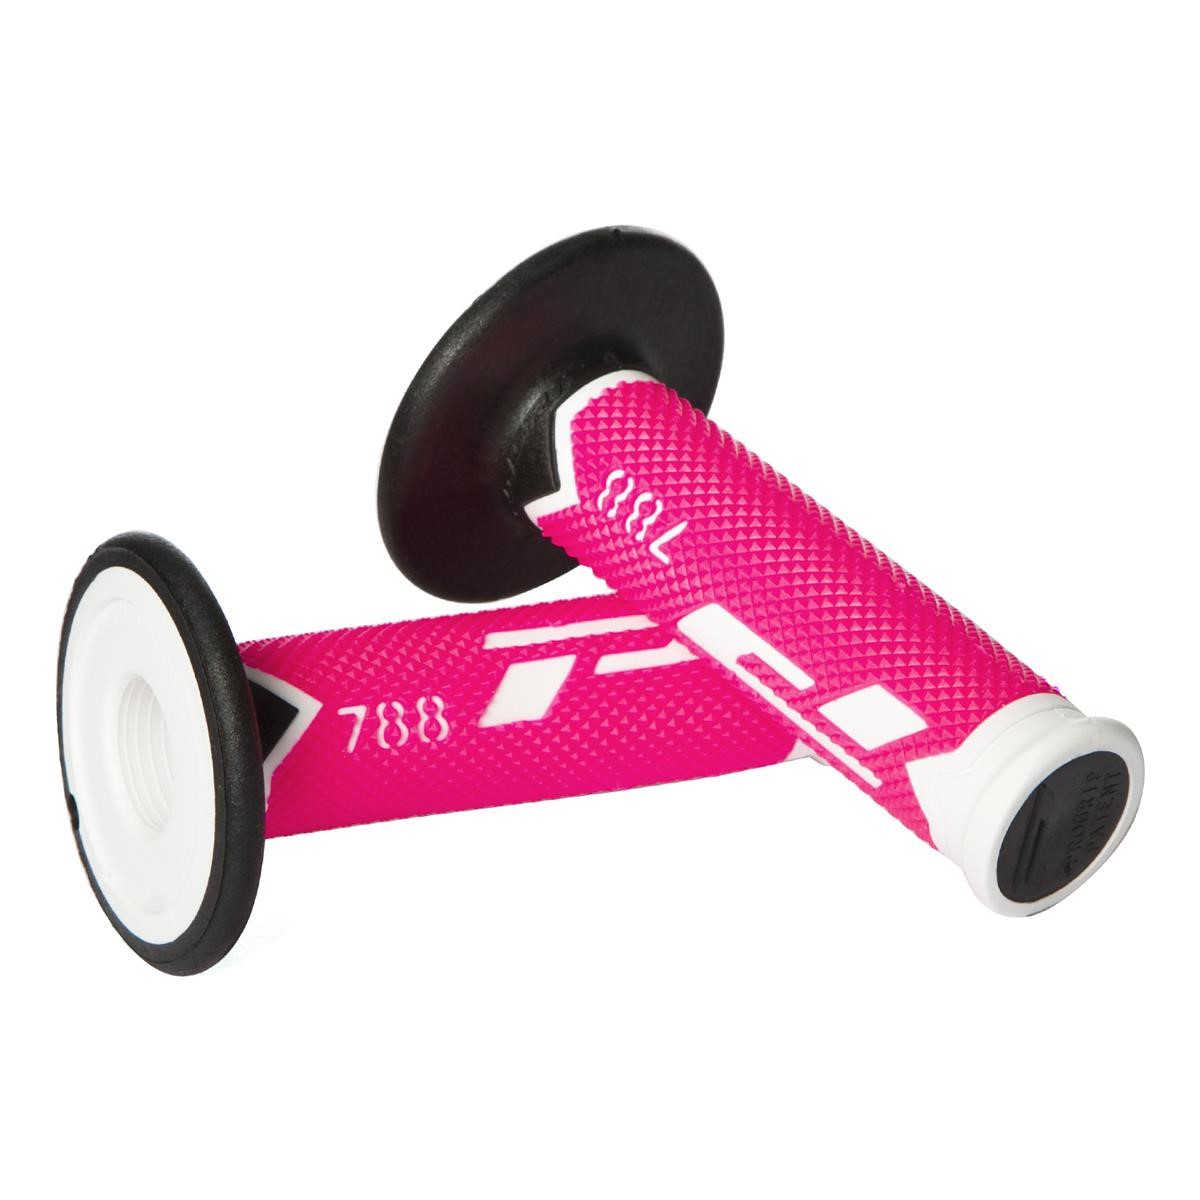 ProGrip Grips 788 fluo-pink/white